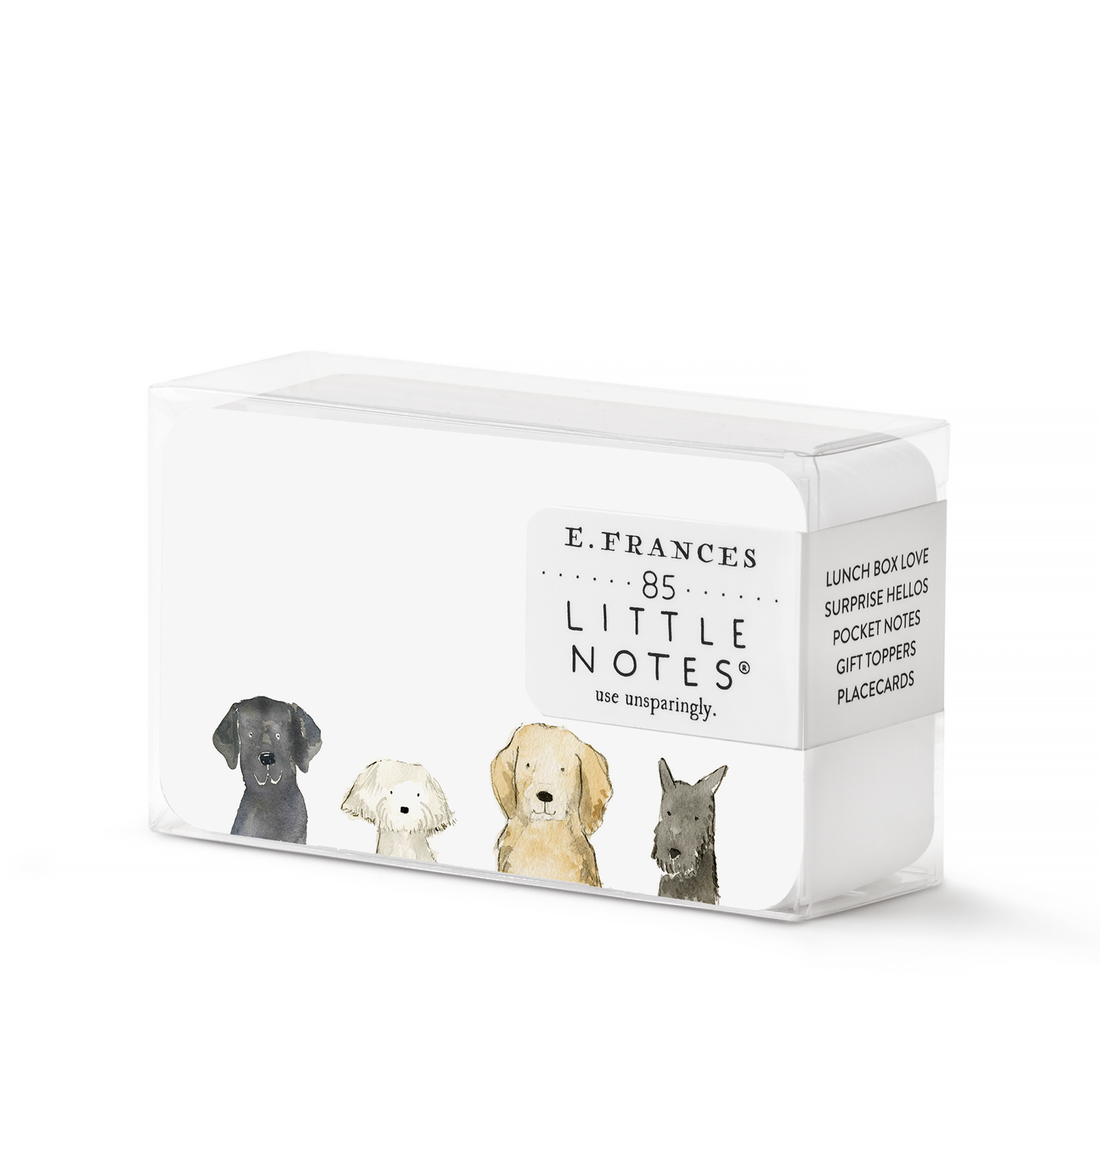 A box of E. Frances Dog Days Little Notes® with illustrations of dogs on it.